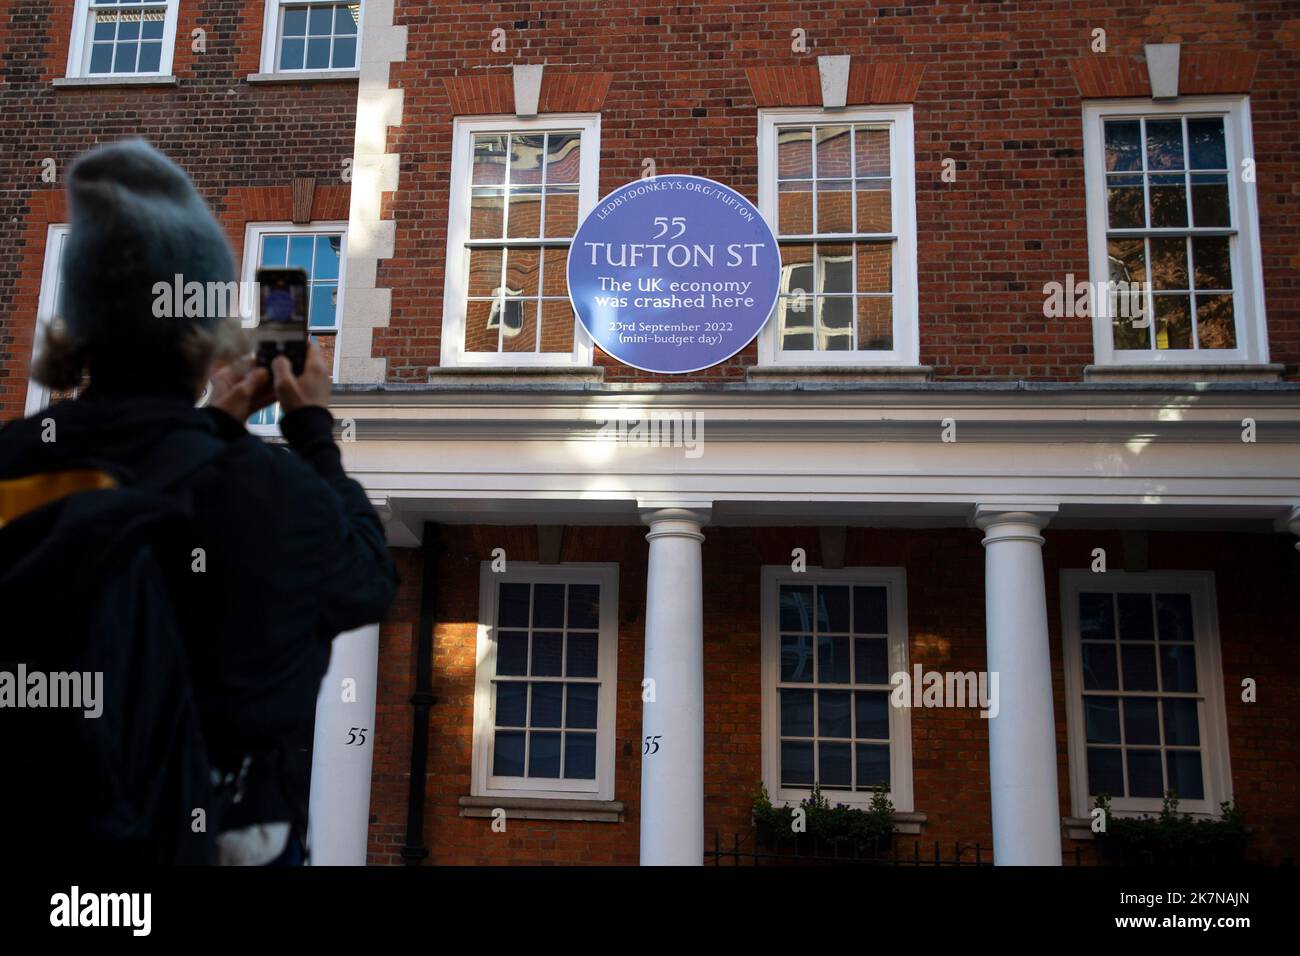 London, UK, 18 October 2022. A woman photographs a blue plaque on 55 Tufton Street in Westminster, which was attached by campaigners from Led By Donkeys. The building is home to several free market groups that were instrumental in Kwarsi Kwarteng's mini budget. Credit: David Mirzoeff/Alamy Live News Stock Photo